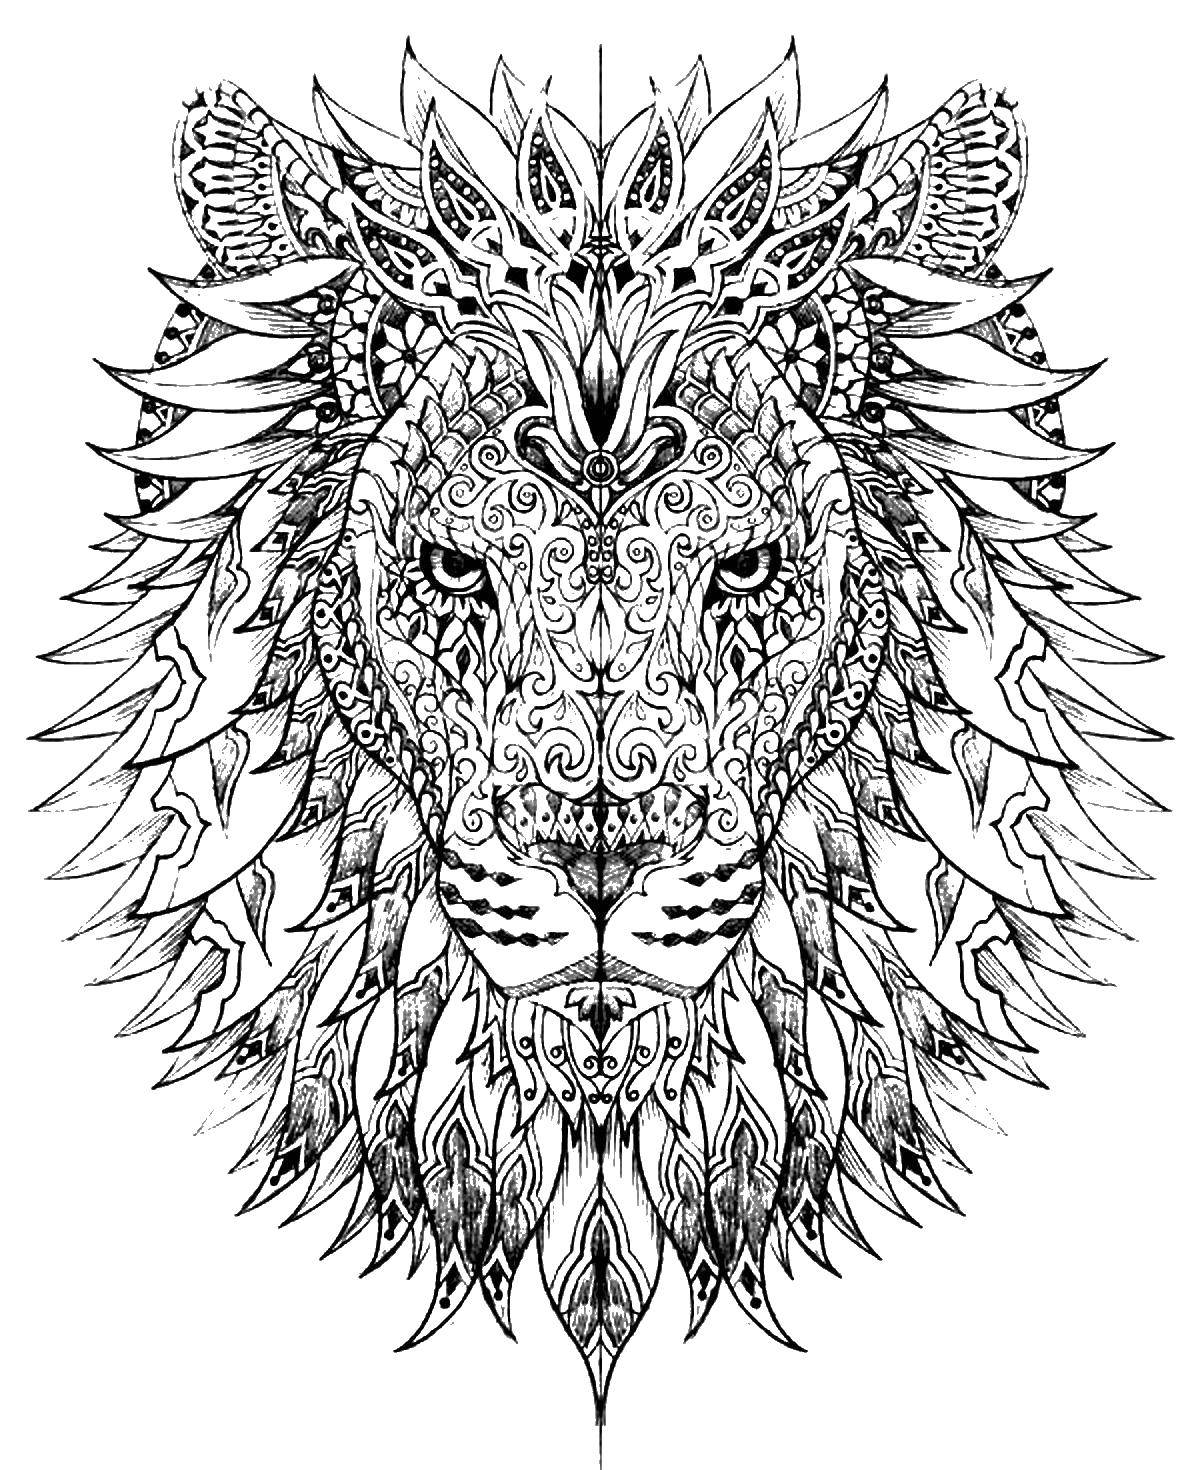 Coloring Patterns. Category patterns. Tags:  antisress, patterns, shapes, lion.